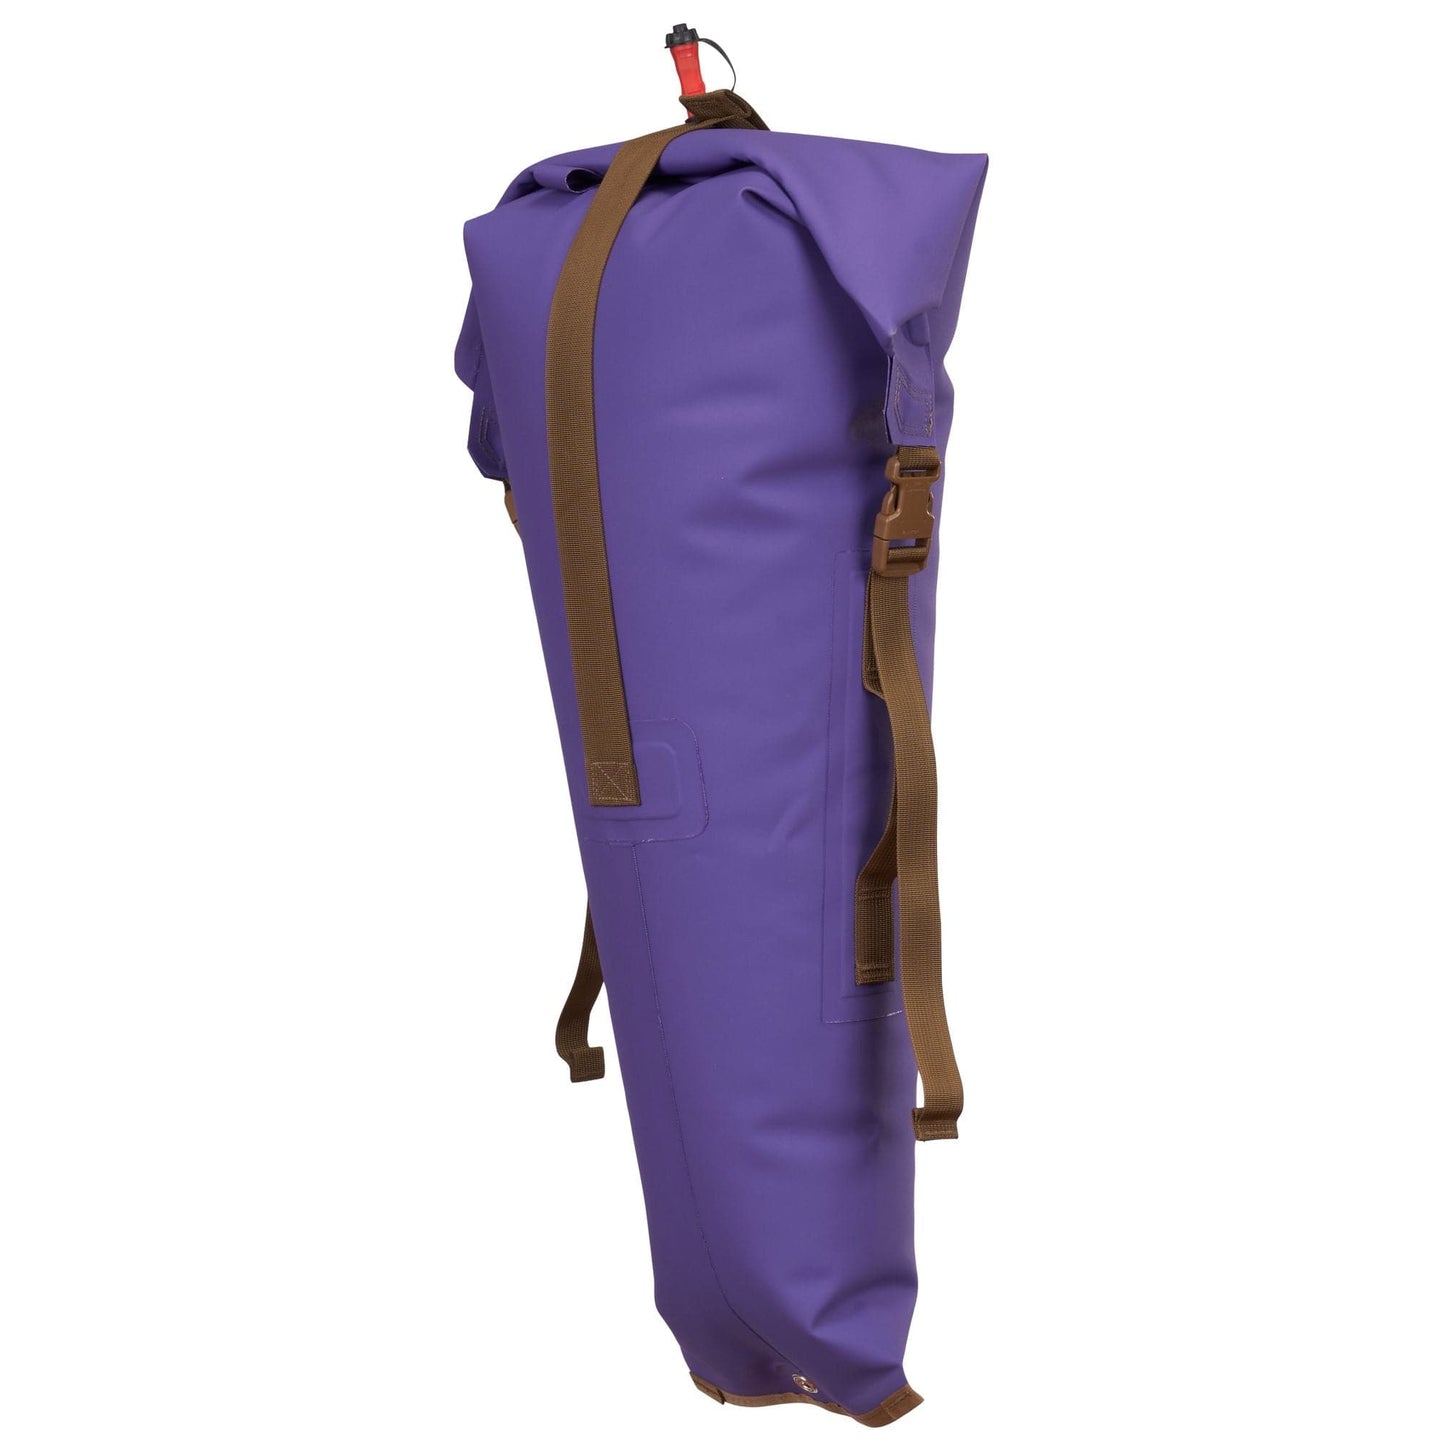 Featuring the Futa Kayak Stow Float dry bag, kayak flotation, kayak outfitting manufactured by Watershed shown here from a sixth angle.